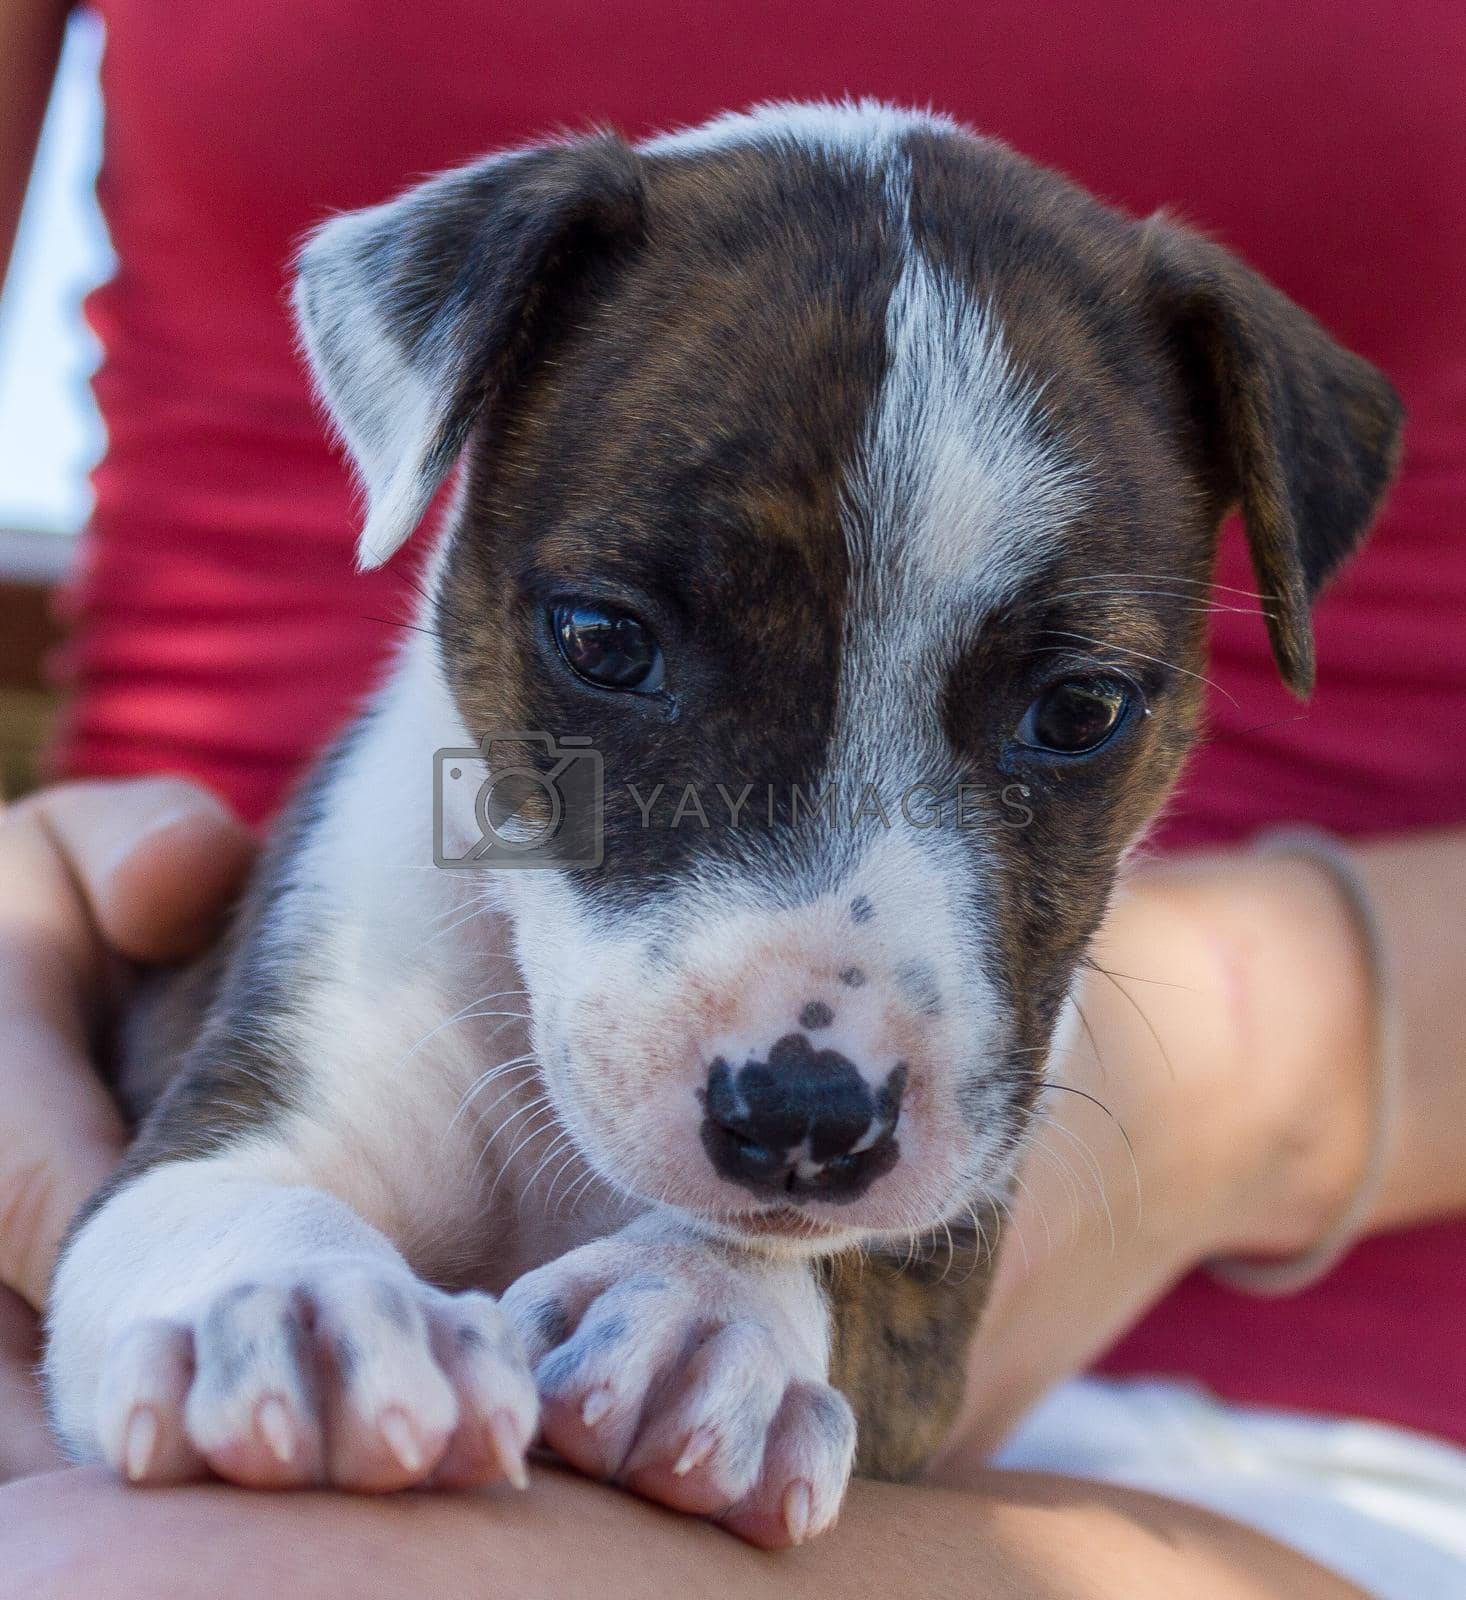 Royalty free image of cute puppy sitting on girls leg, broome australia by bettercallcurry